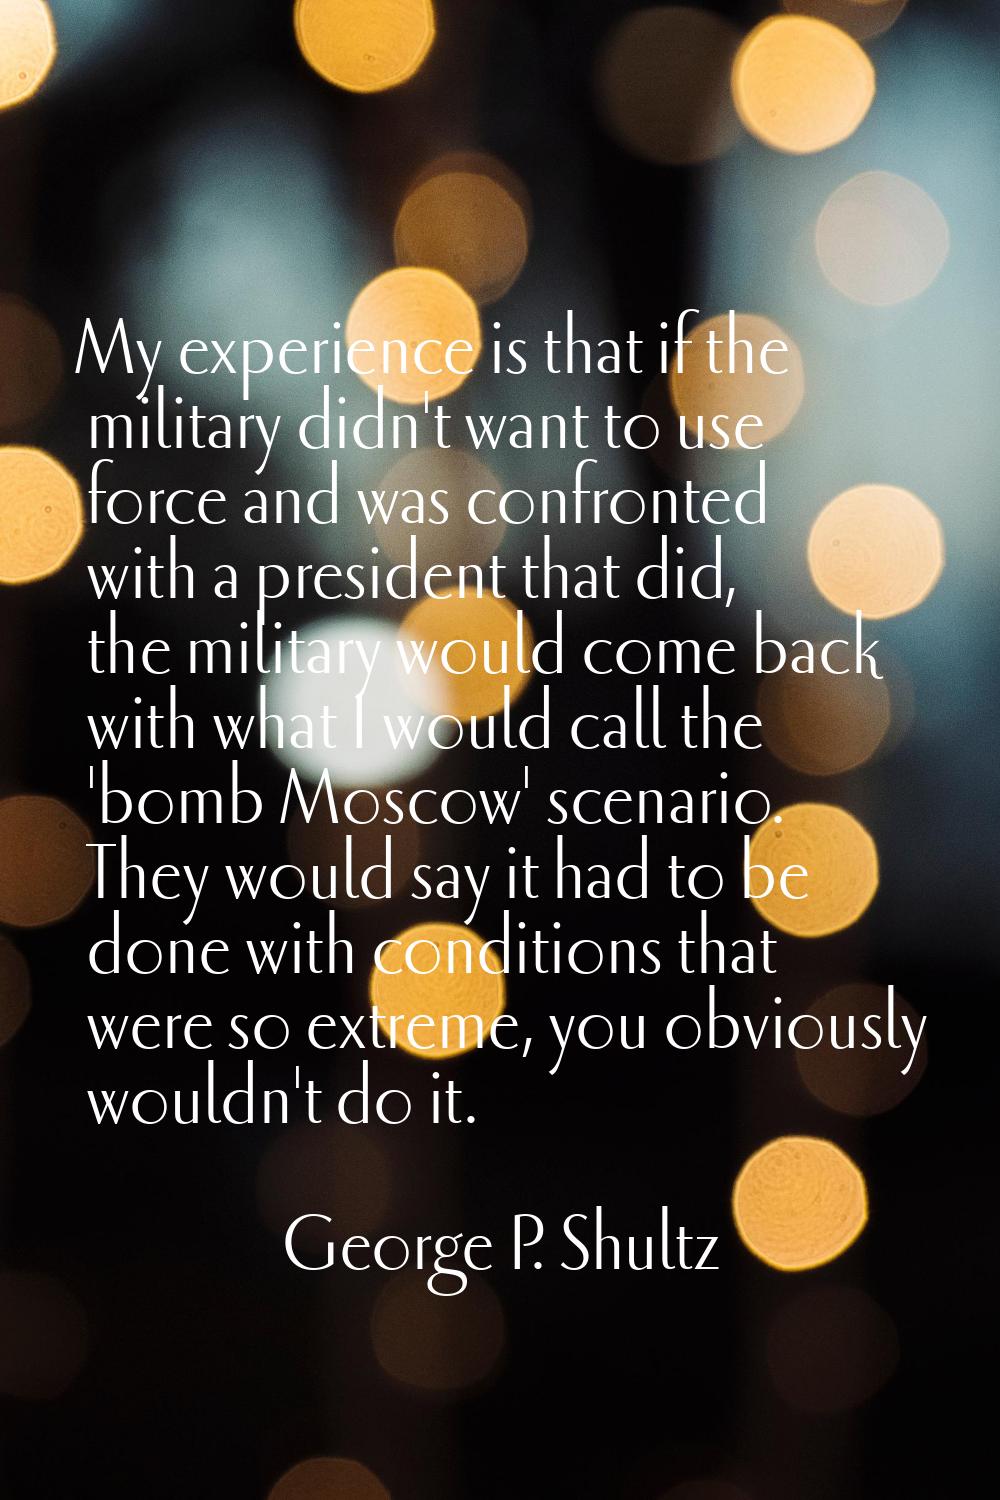 My experience is that if the military didn't want to use force and was confronted with a president 